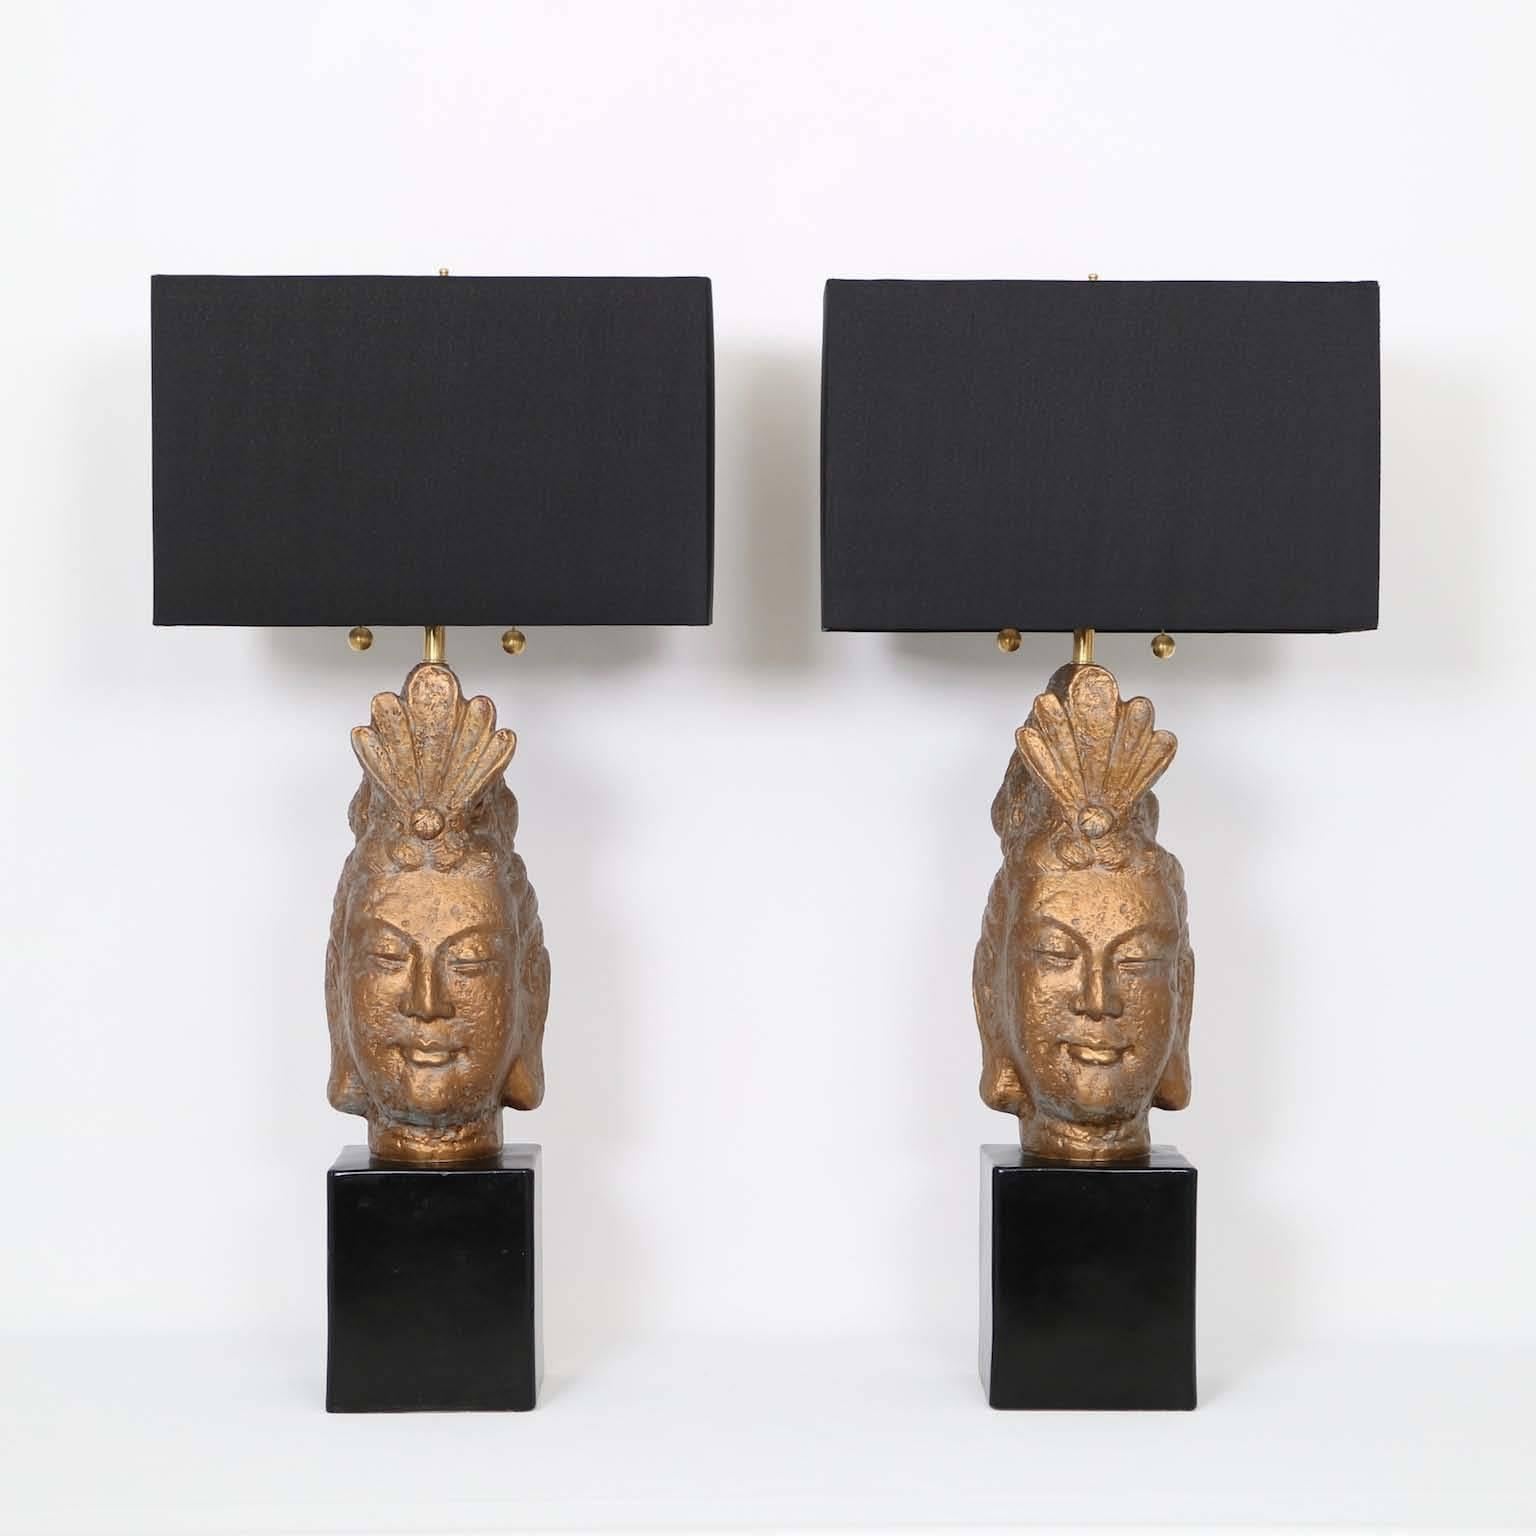 A pair of exotic sculptural table lamps by Quartite Creative Corp., designed in the manner of James Mont, with Buddha heads in plaster, painted in bronze tone, on black bases. Markings include maker name, dated 1959 to the backs. Noted height is to